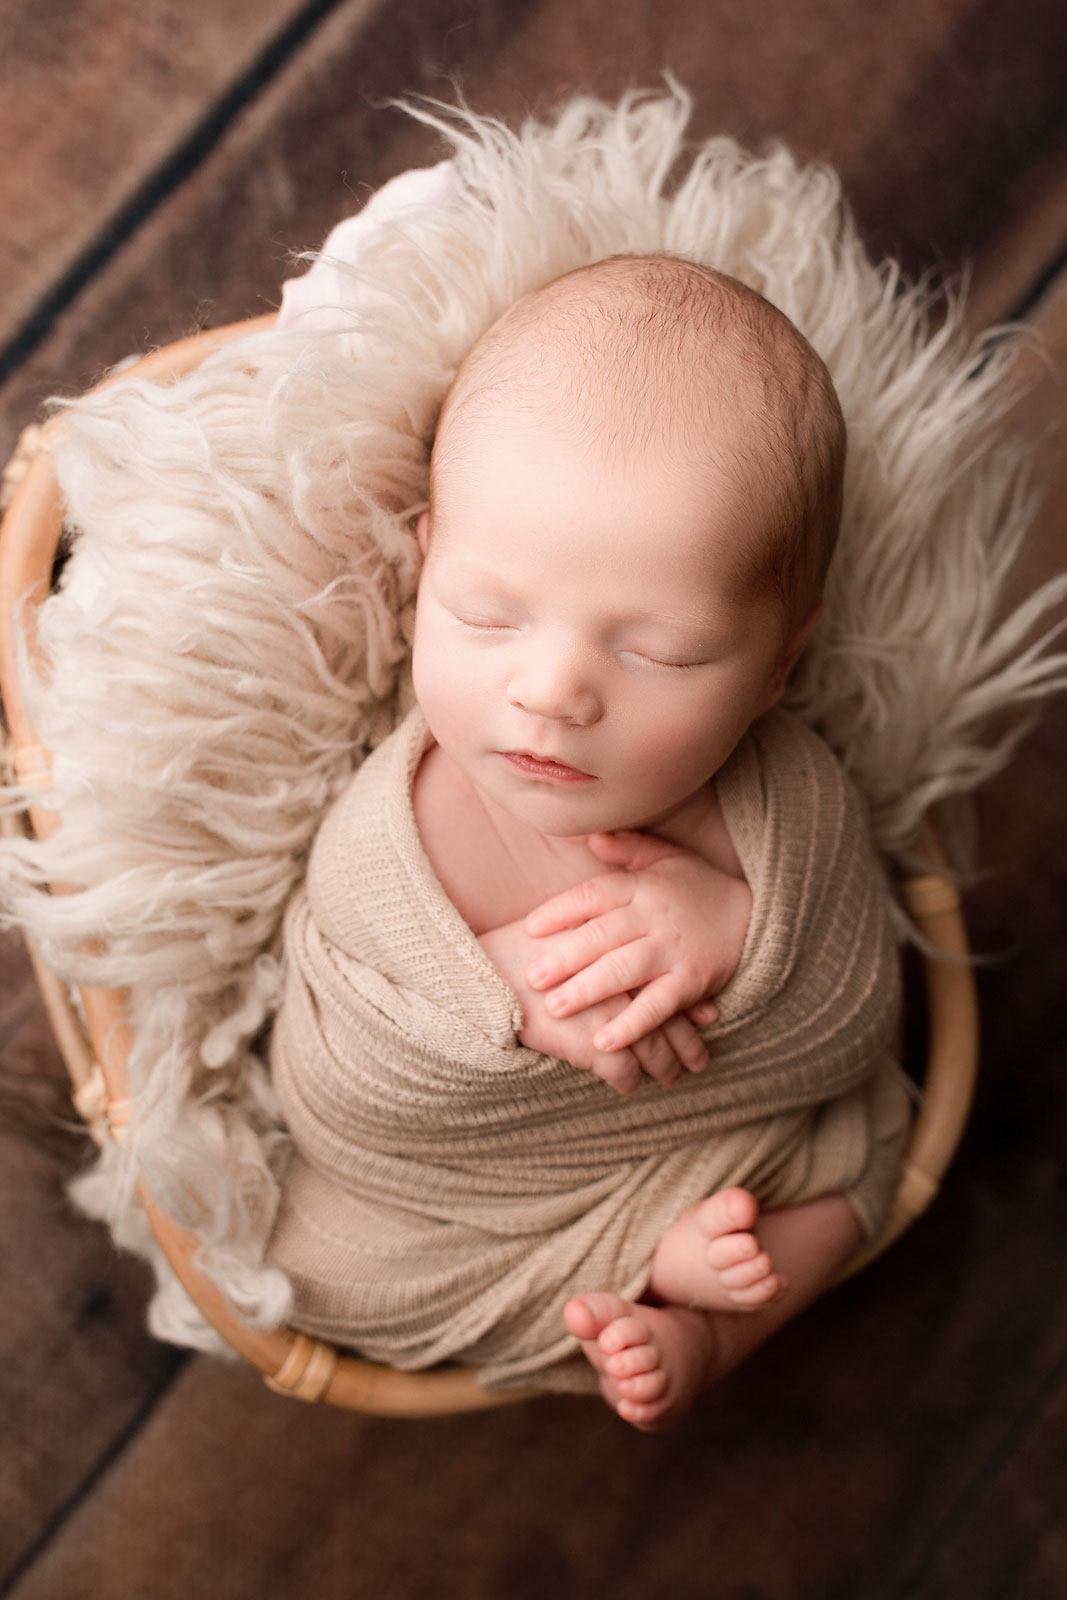 newborn photography session flemington nj, swaddled baby asleep in basket with cream colored fur against wood floor background